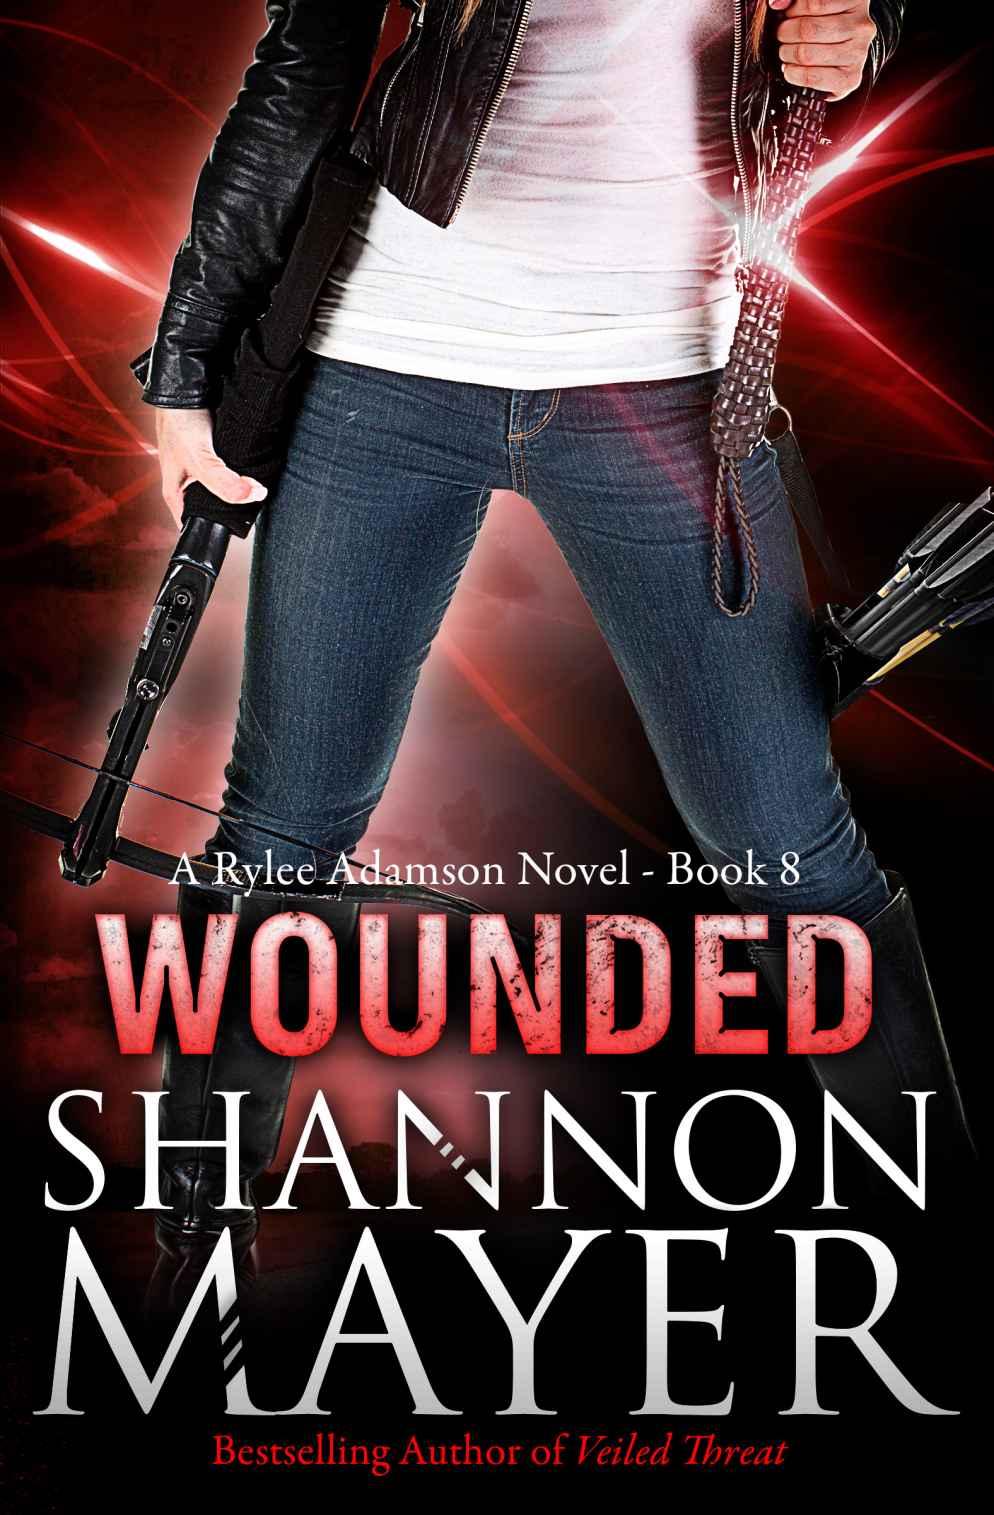 Wounded: Book 8 (A Rylee Adamson Novel) by Shannon Mayer